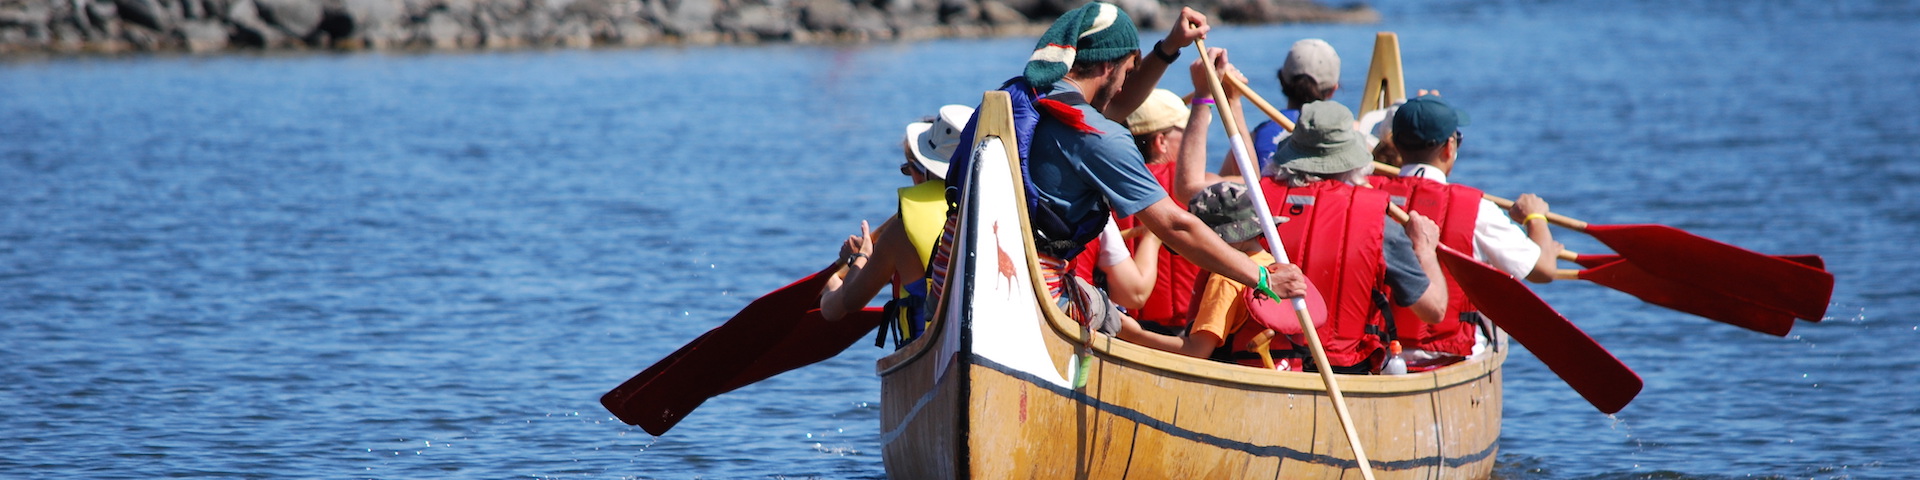 Voyageur Canoe Trips on Lake Superior by Naturally Superior Adventures - Image 240